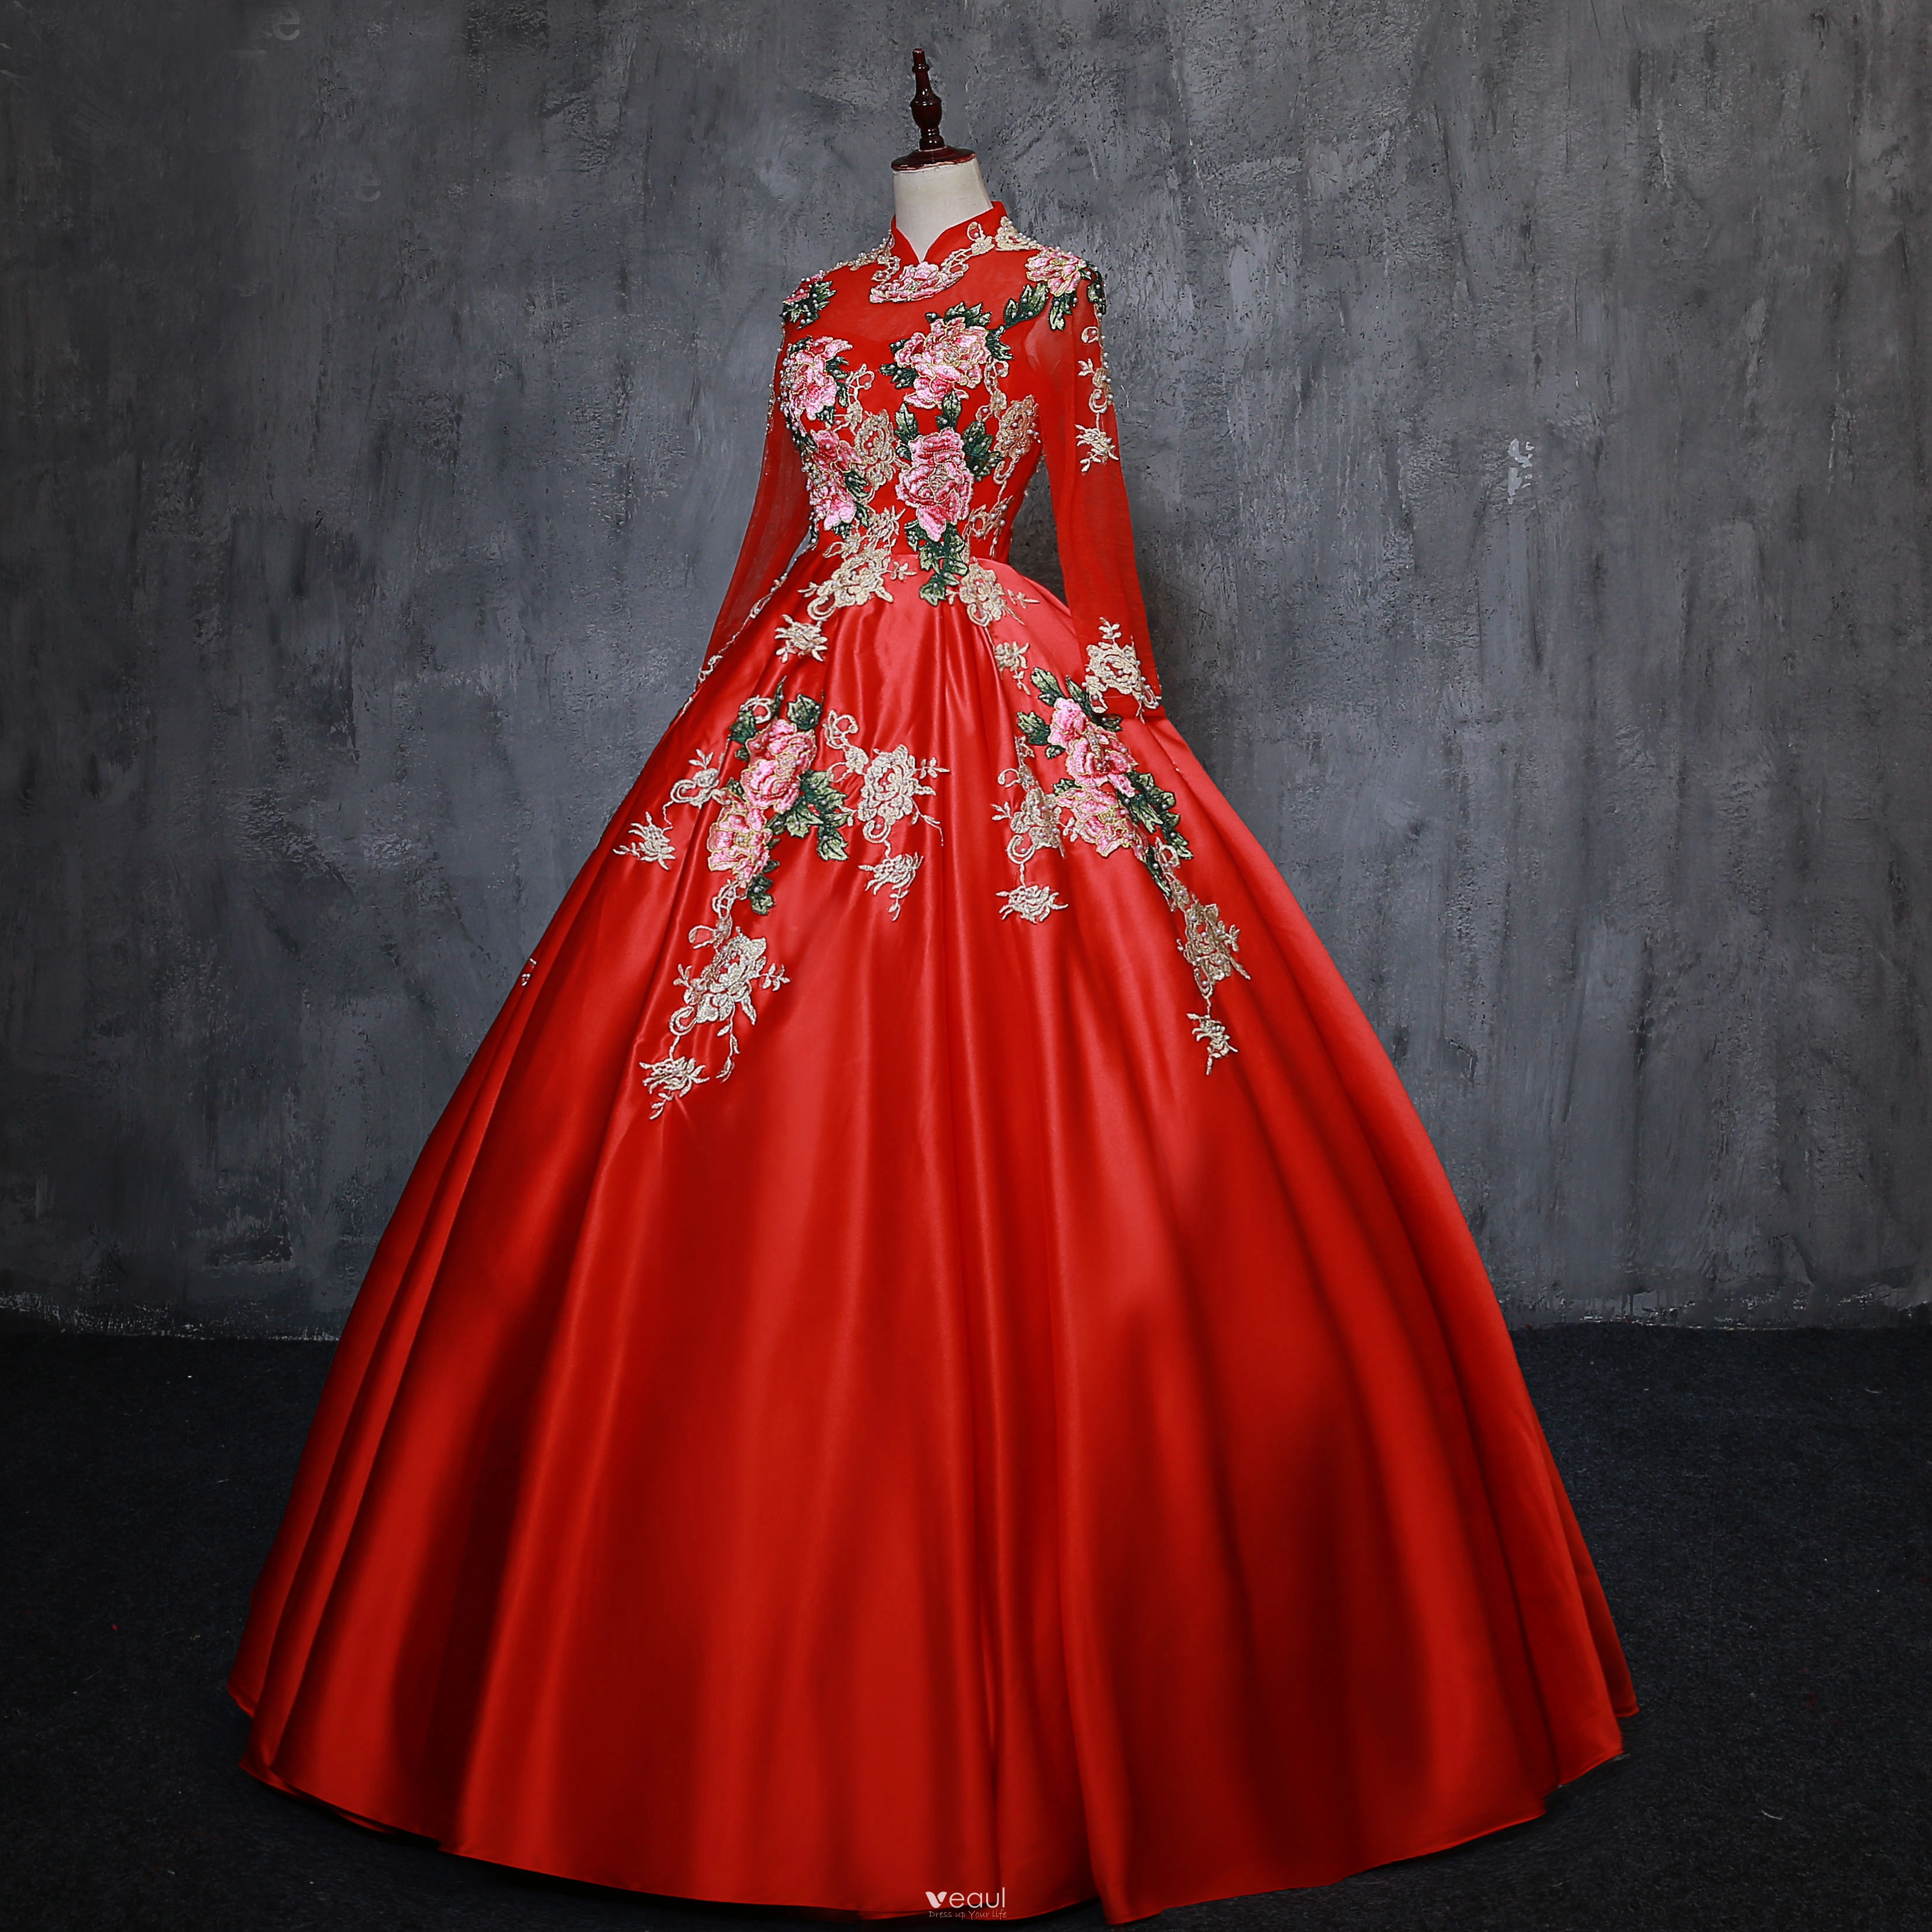 Chinese Inspired Gowns - Bridestory Blog